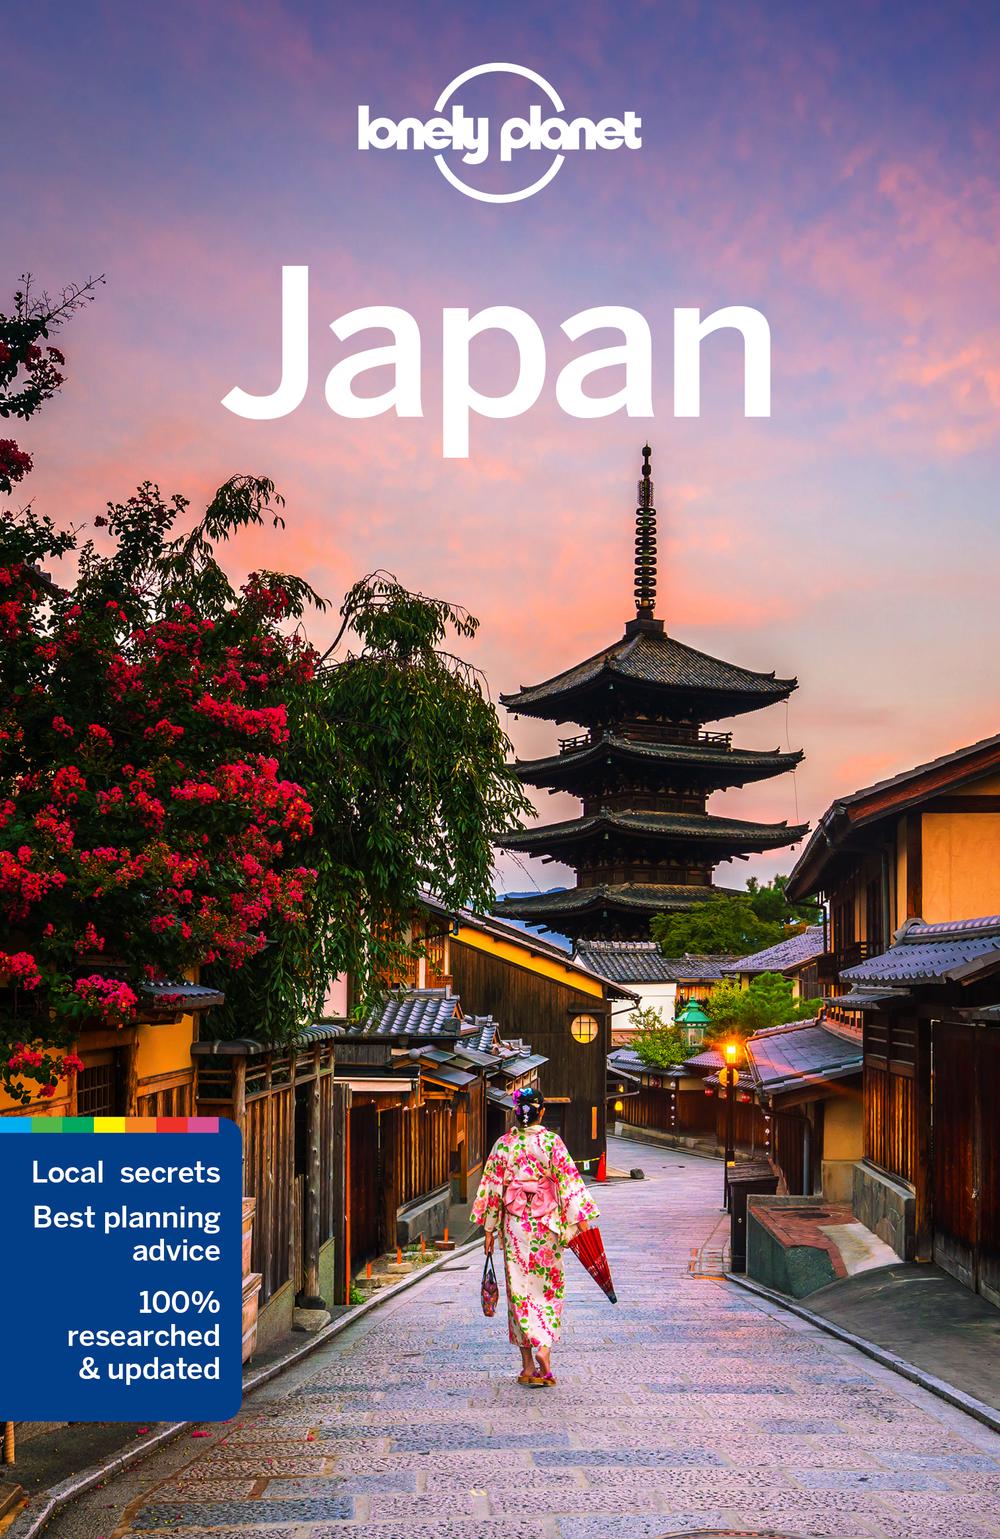 Rebecca　Lonely　online　Planet　Japan　by　9781788683814　Milner,　Paperback,　Buy　at　The　Nile